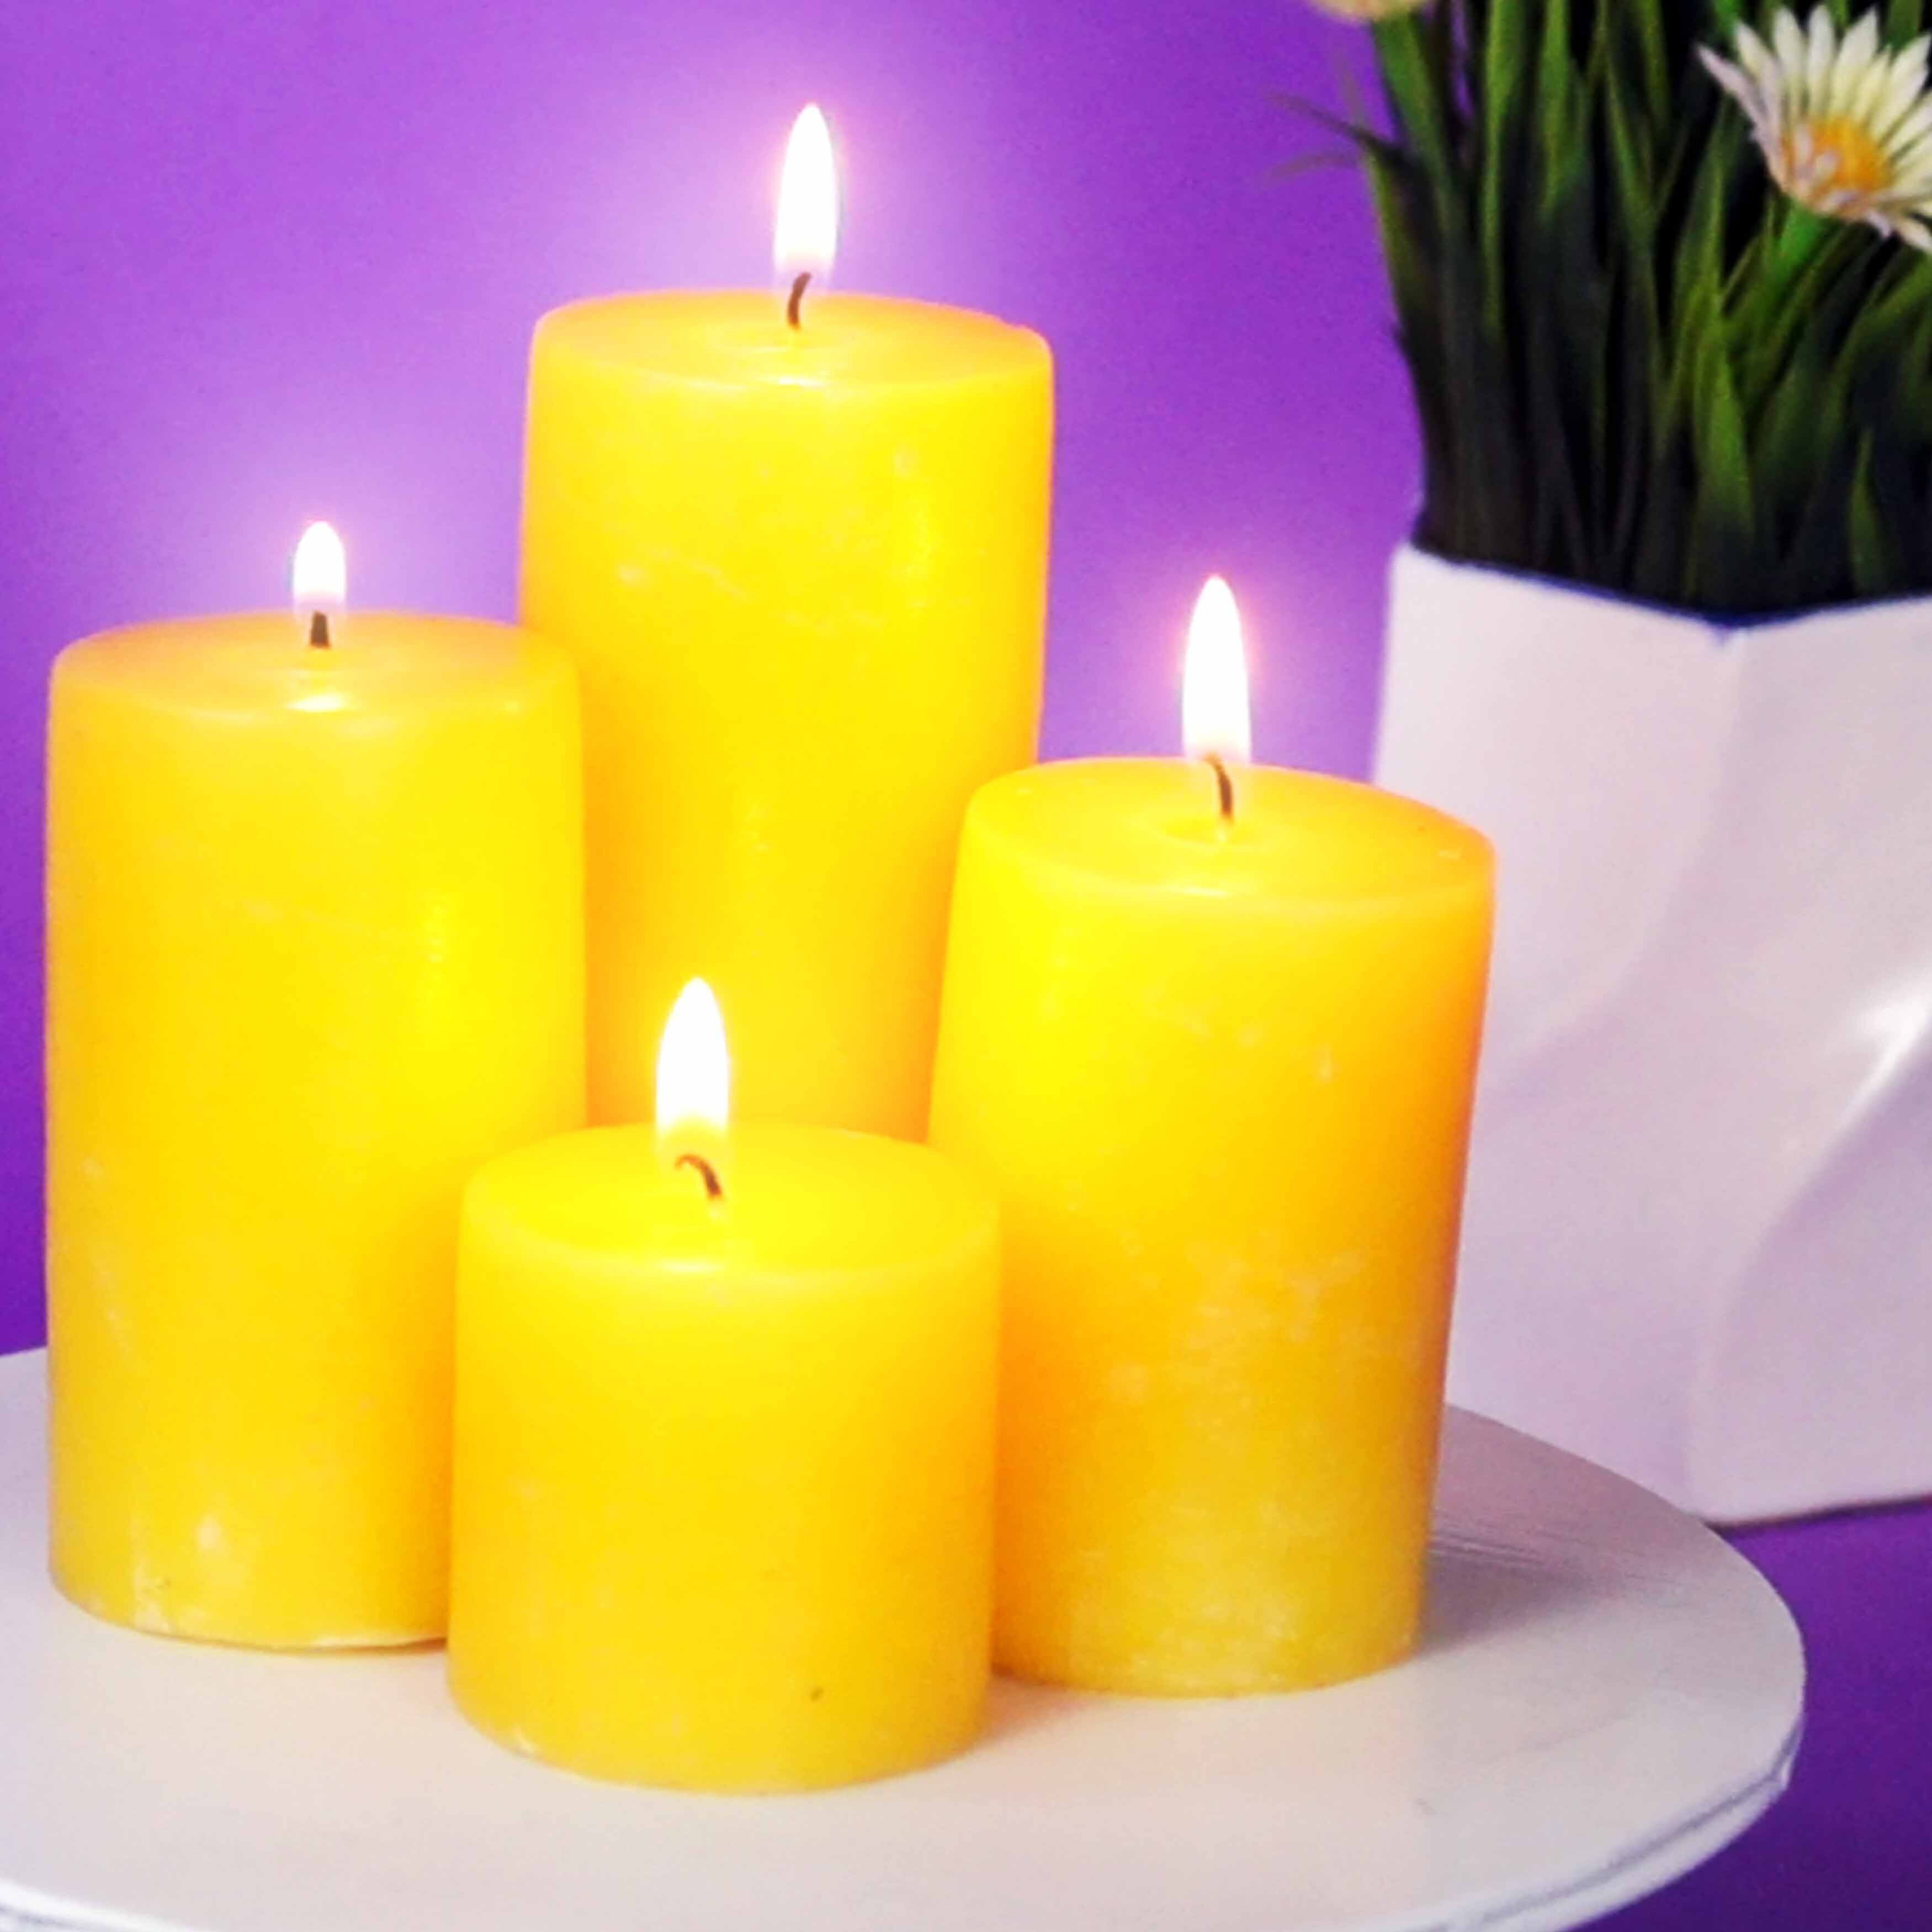 Asian Aura White Jasmine Scented Pillar Candle Gift Set (Pack of 4)